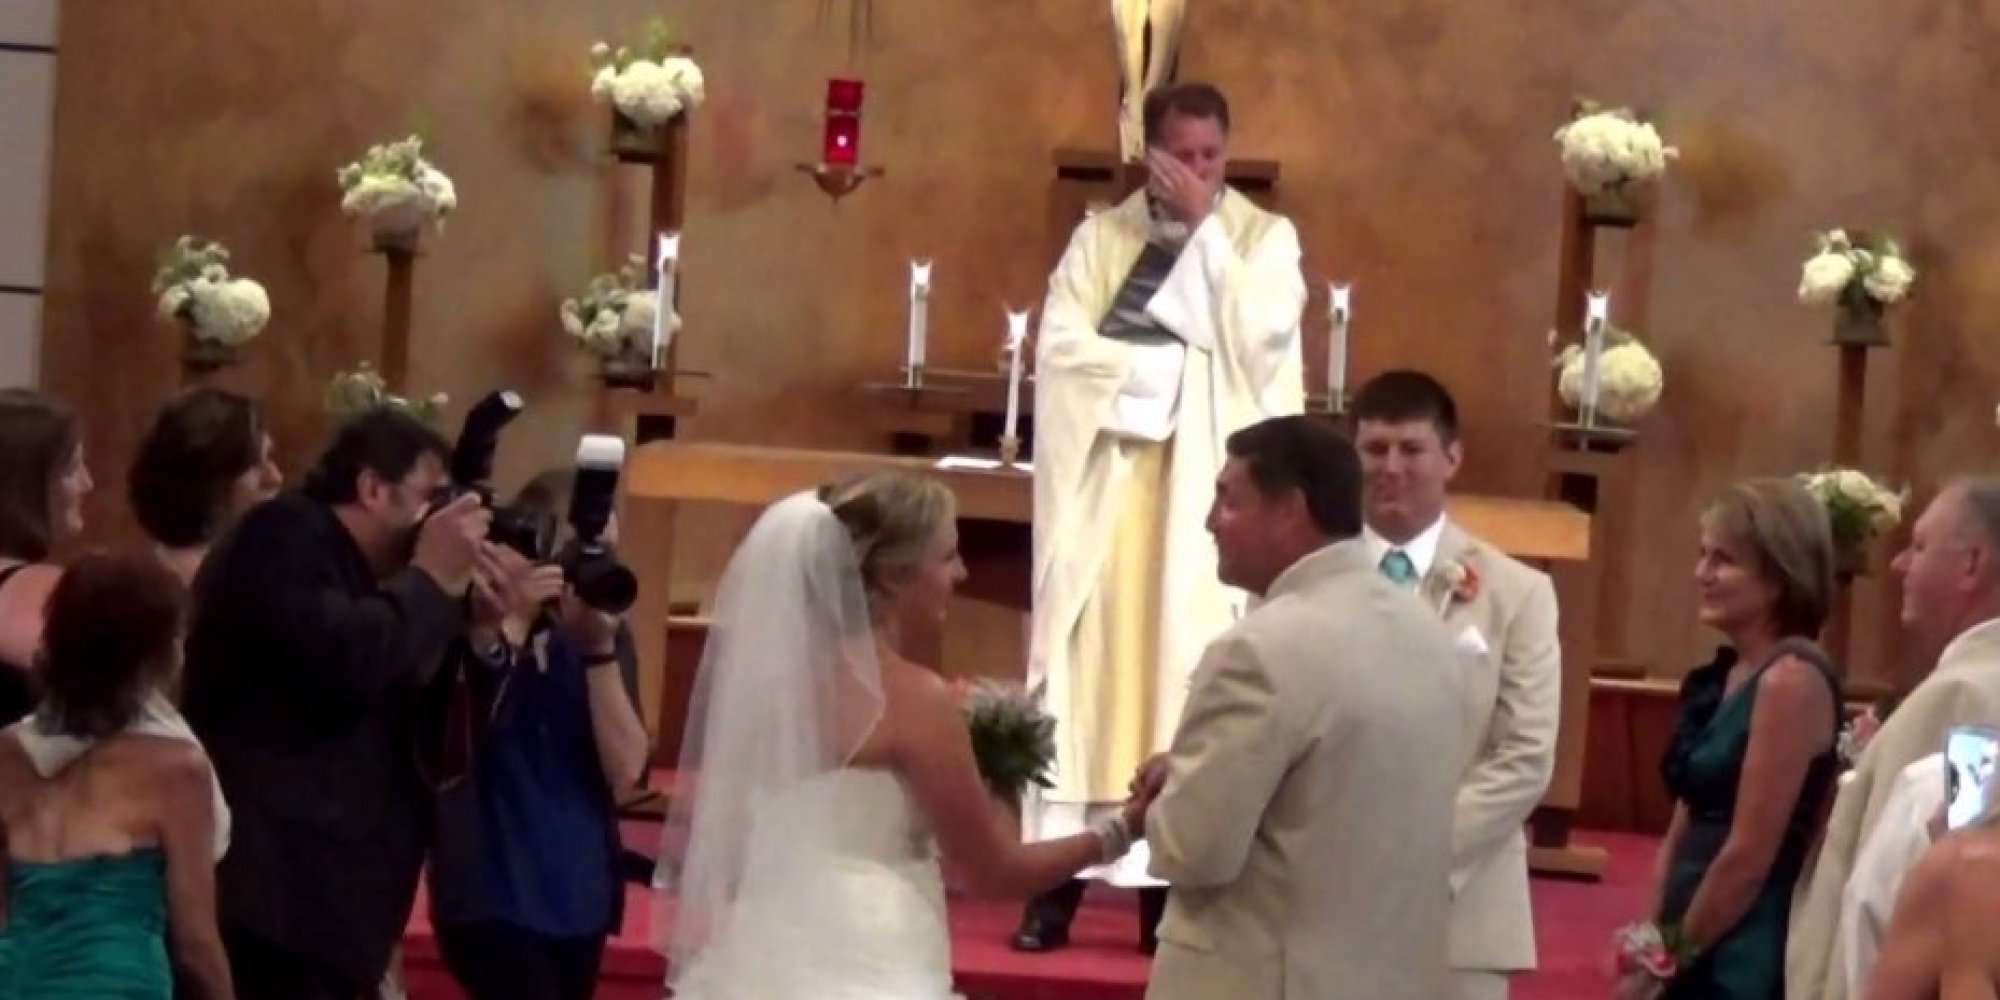 father bride song sings daughter tears brings moving huffingtonpost marriage songs aisle huffpost singing